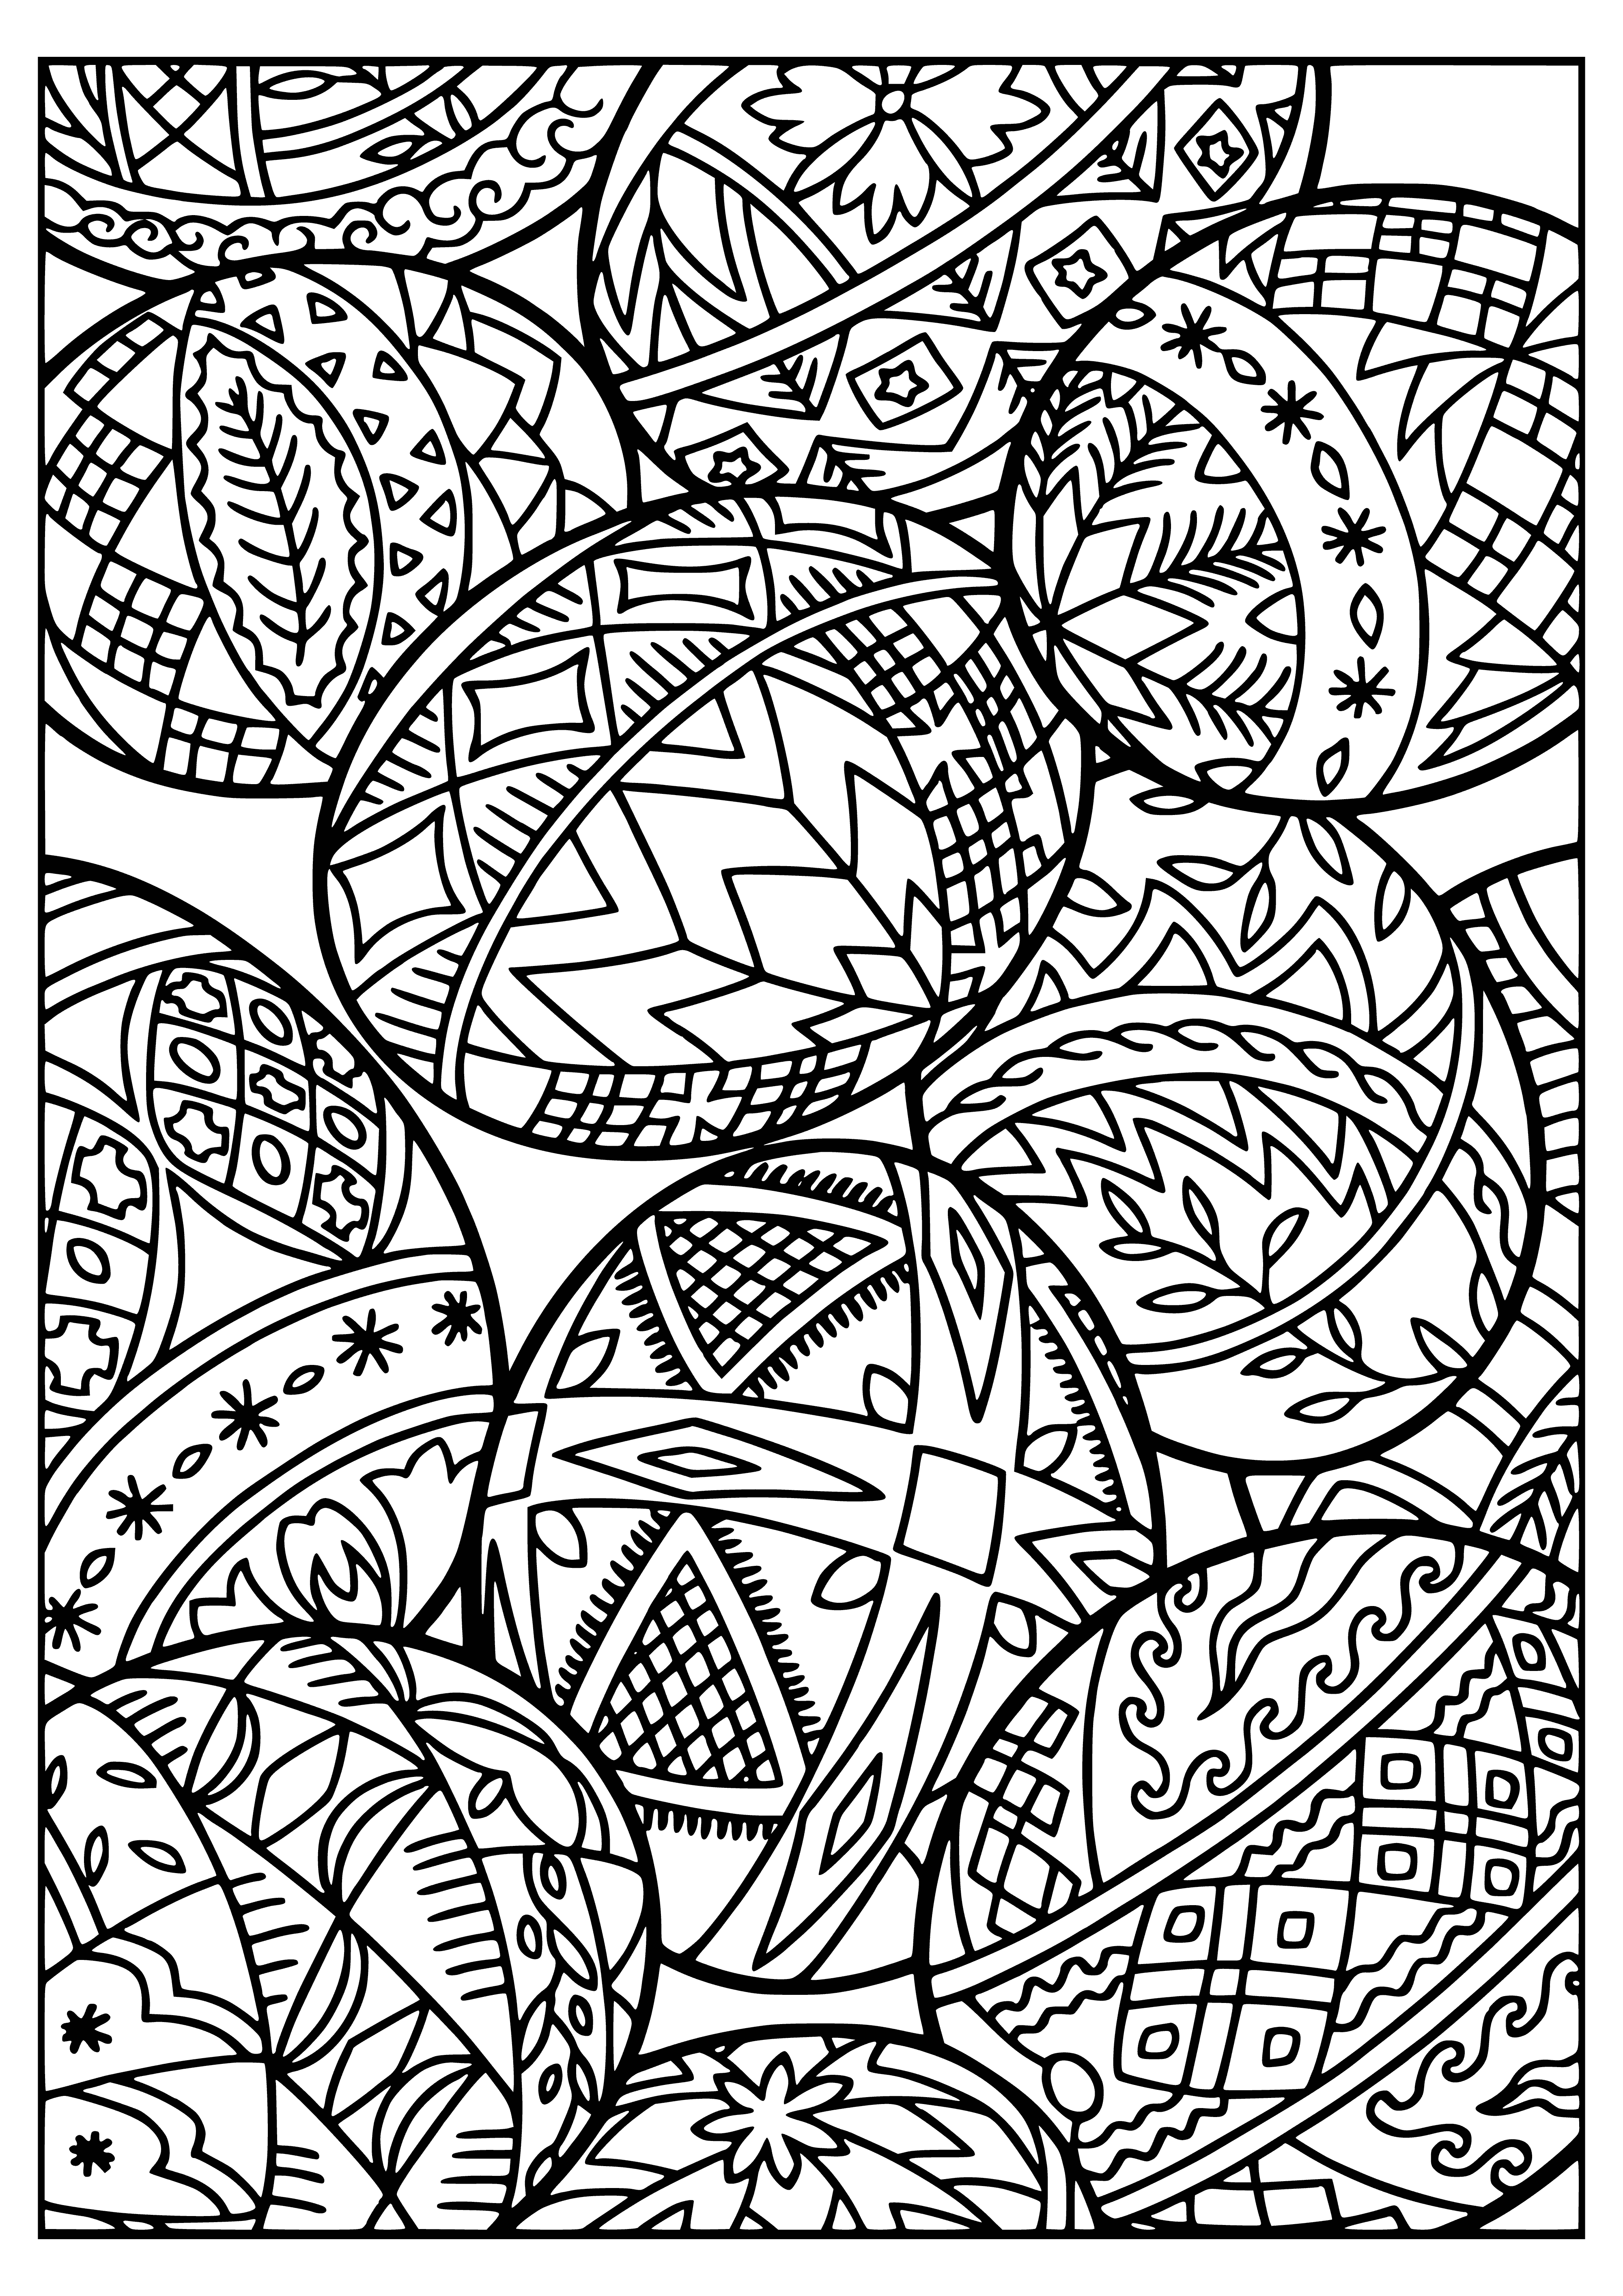 coloring page: 3 Easter eggs in this coloring page: yellow, green & pink, each with unique patterns.